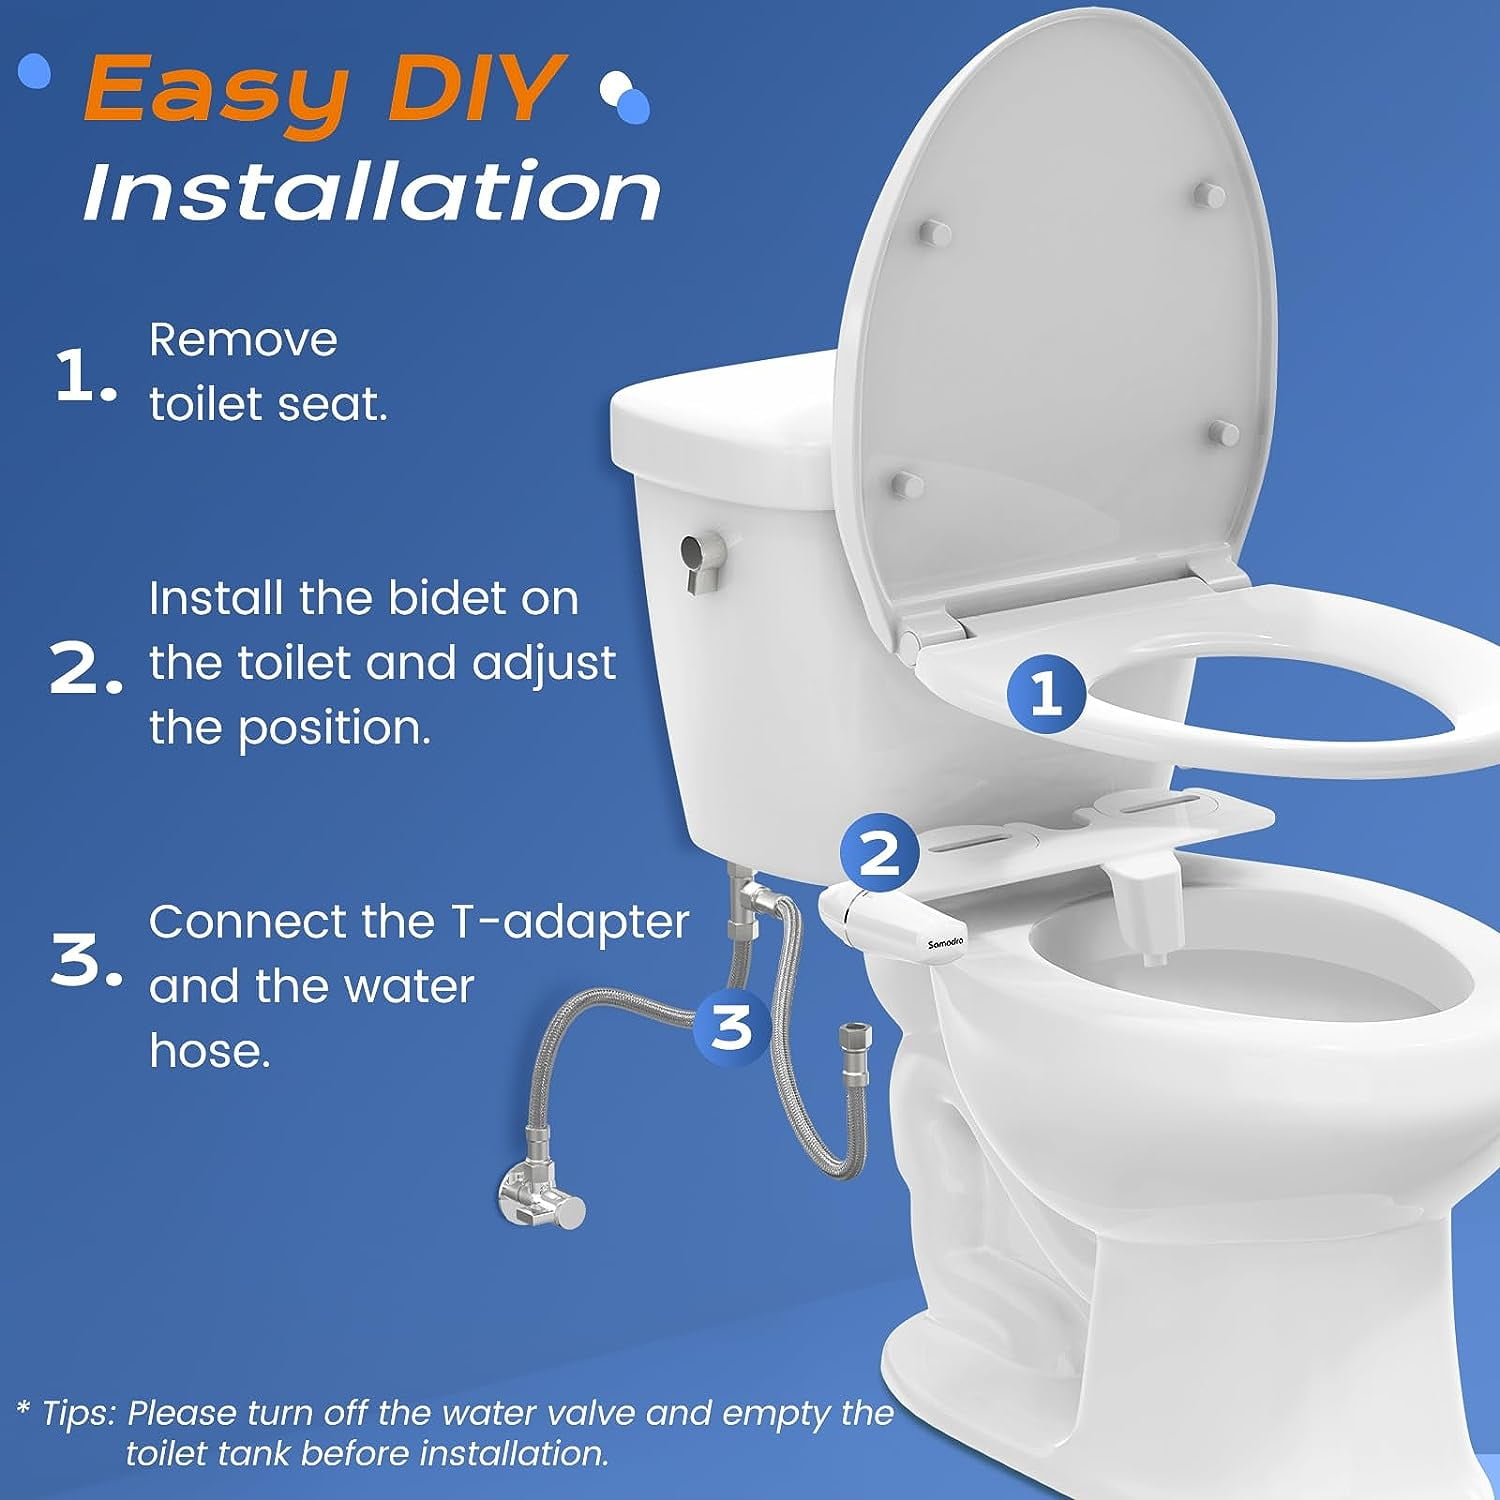 SAMODRA Self Cleaning Bidet for Toilet, Ultra-Slim Single Nozzle Bidet  Attachment for Toilet with Adjustable Water Pressure, Fresh Water  Non-Electric Bidet，Minimalist Bidet Ease of Use 